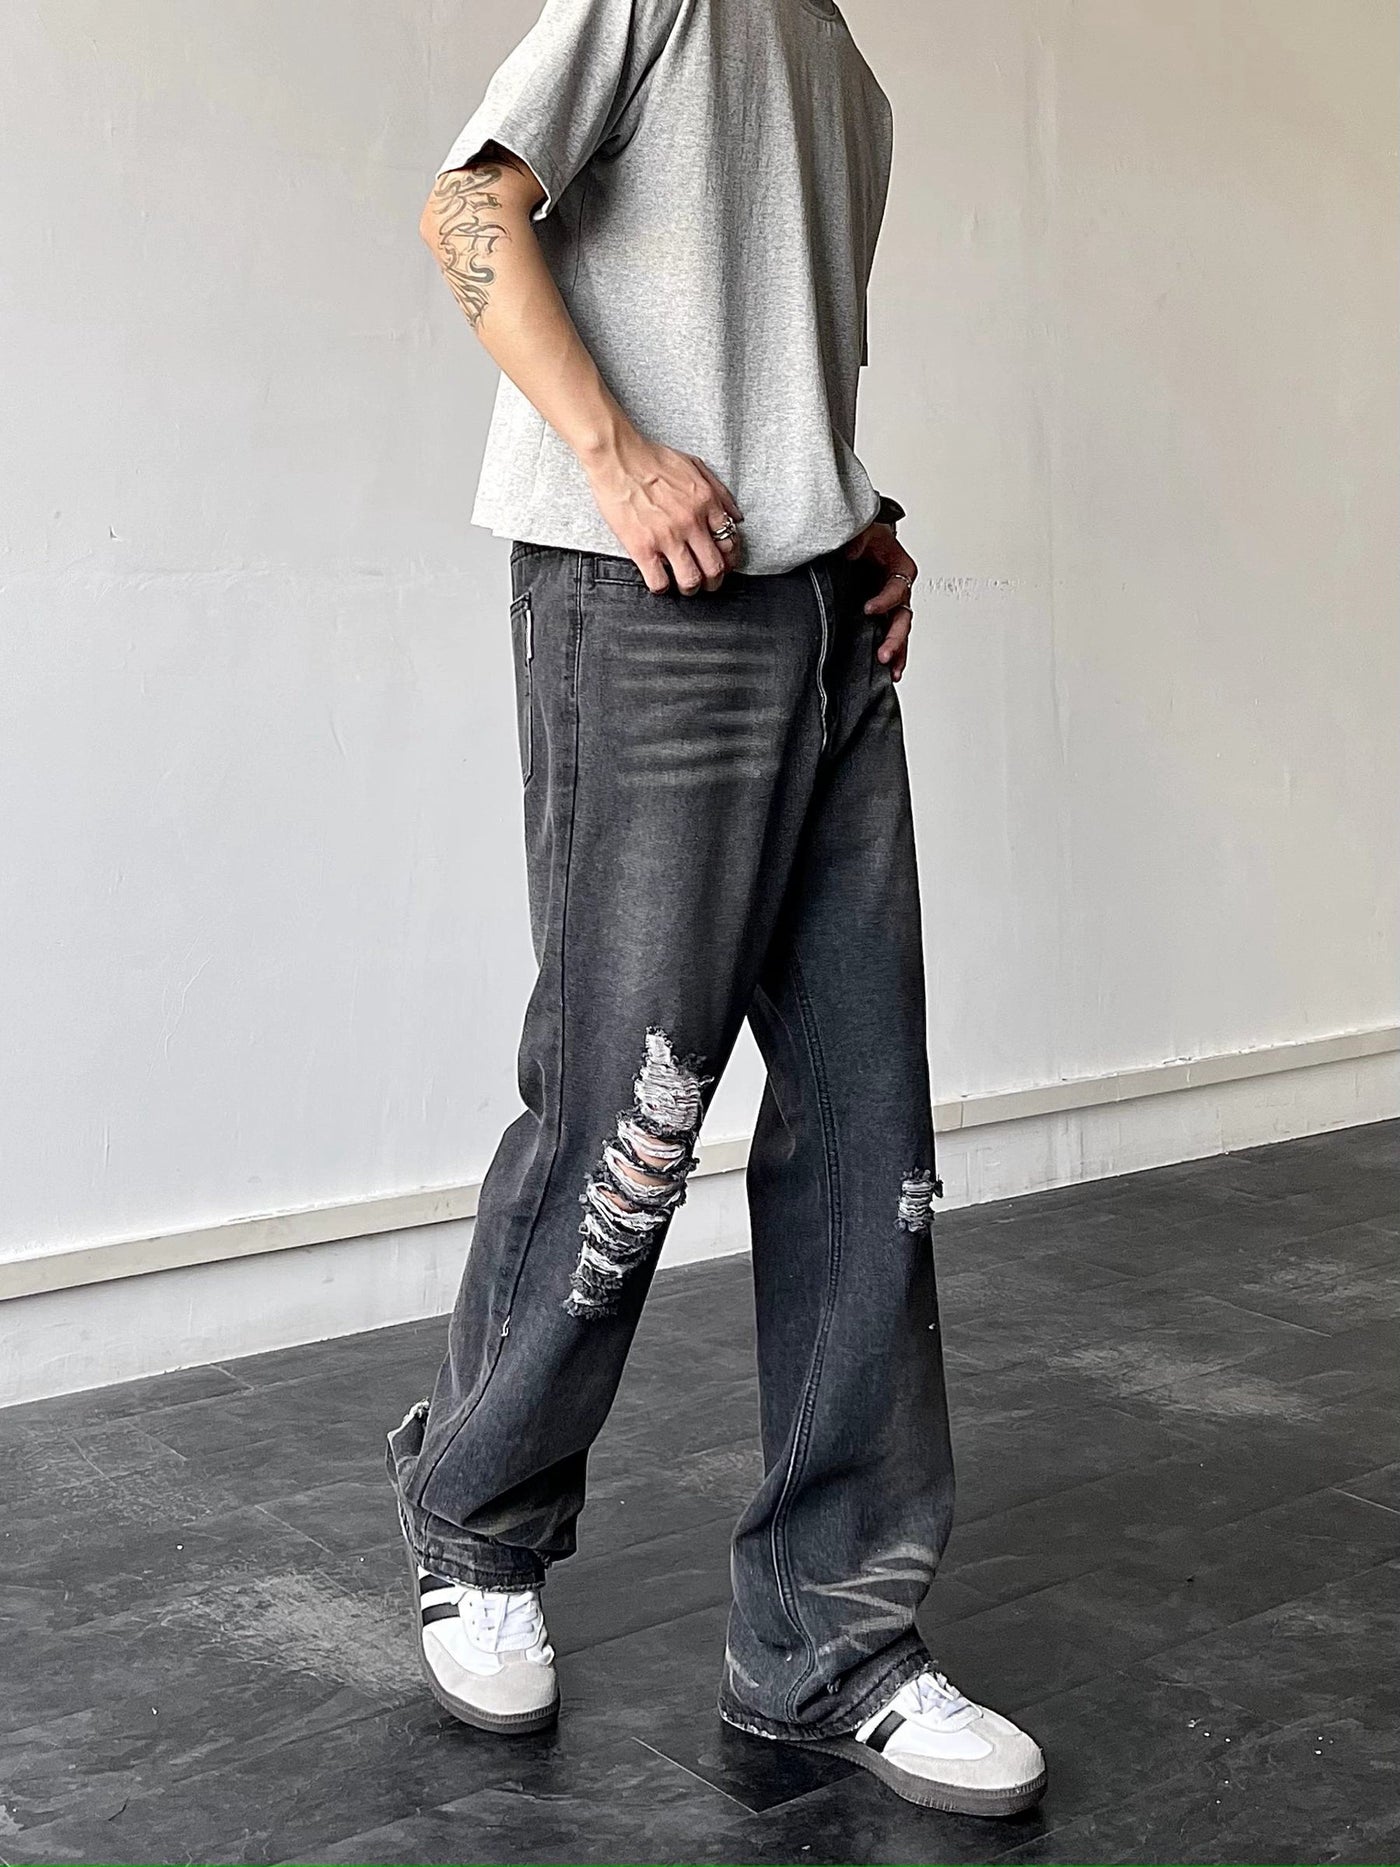 Cat Whisker Ripped Washed Jeans Korean Street Fashion Jeans By Blacklists Shop Online at OH Vault